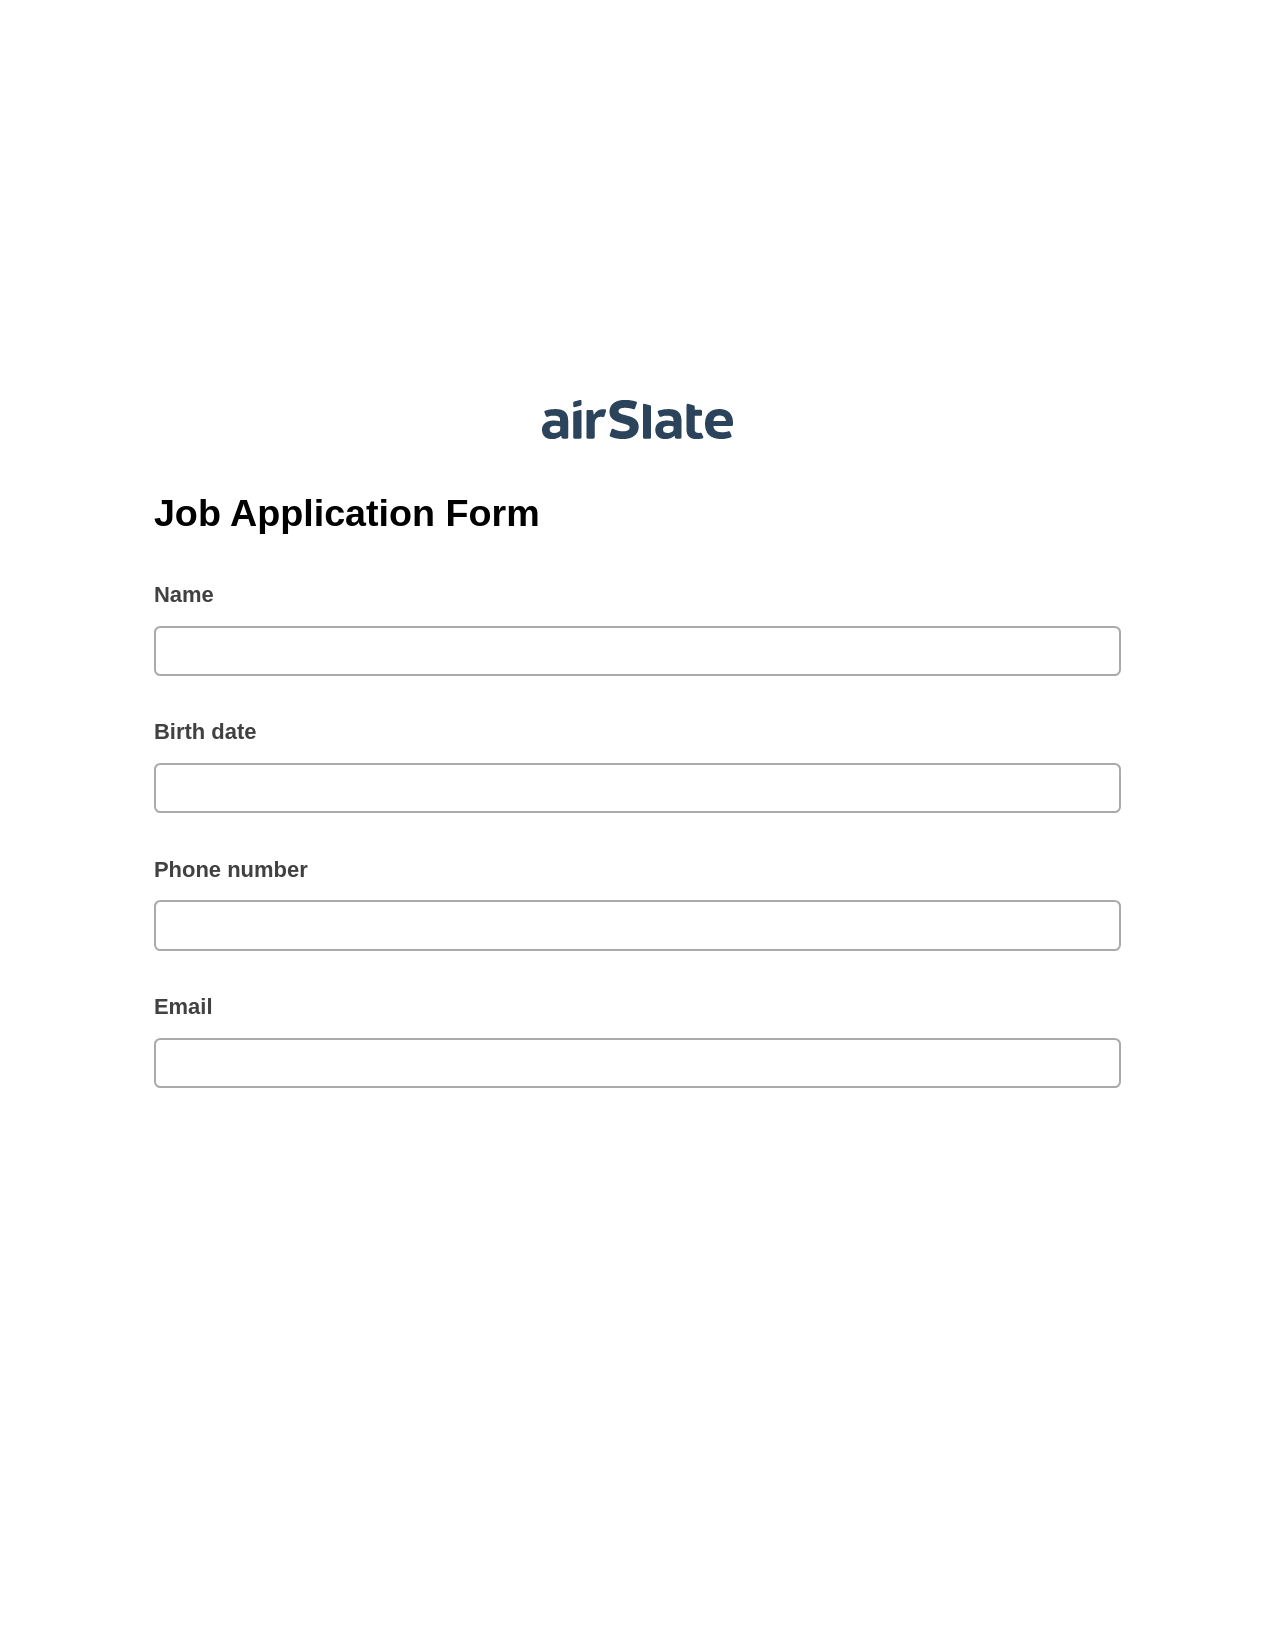 Job Application Form Pre-fill from CSV File Dropdown Options Bot, Send a Slate to MS Dynamics 365 Contact Bot, Email Notification Postfinish Bot